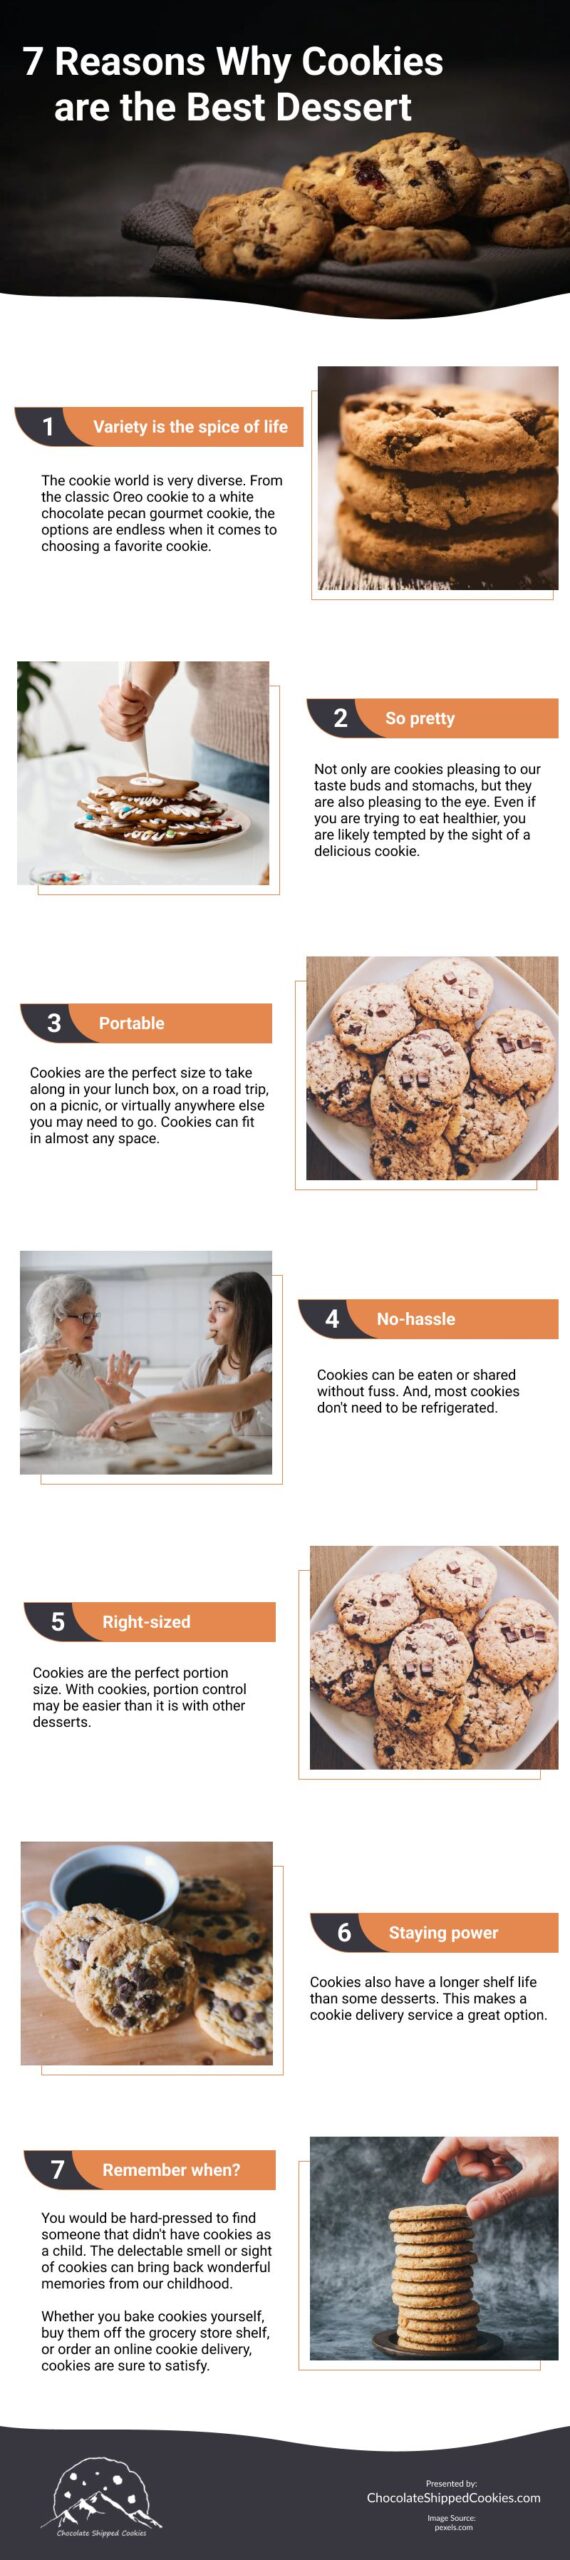 7 Reasons Why Cookies are the Best Dessert Infographic